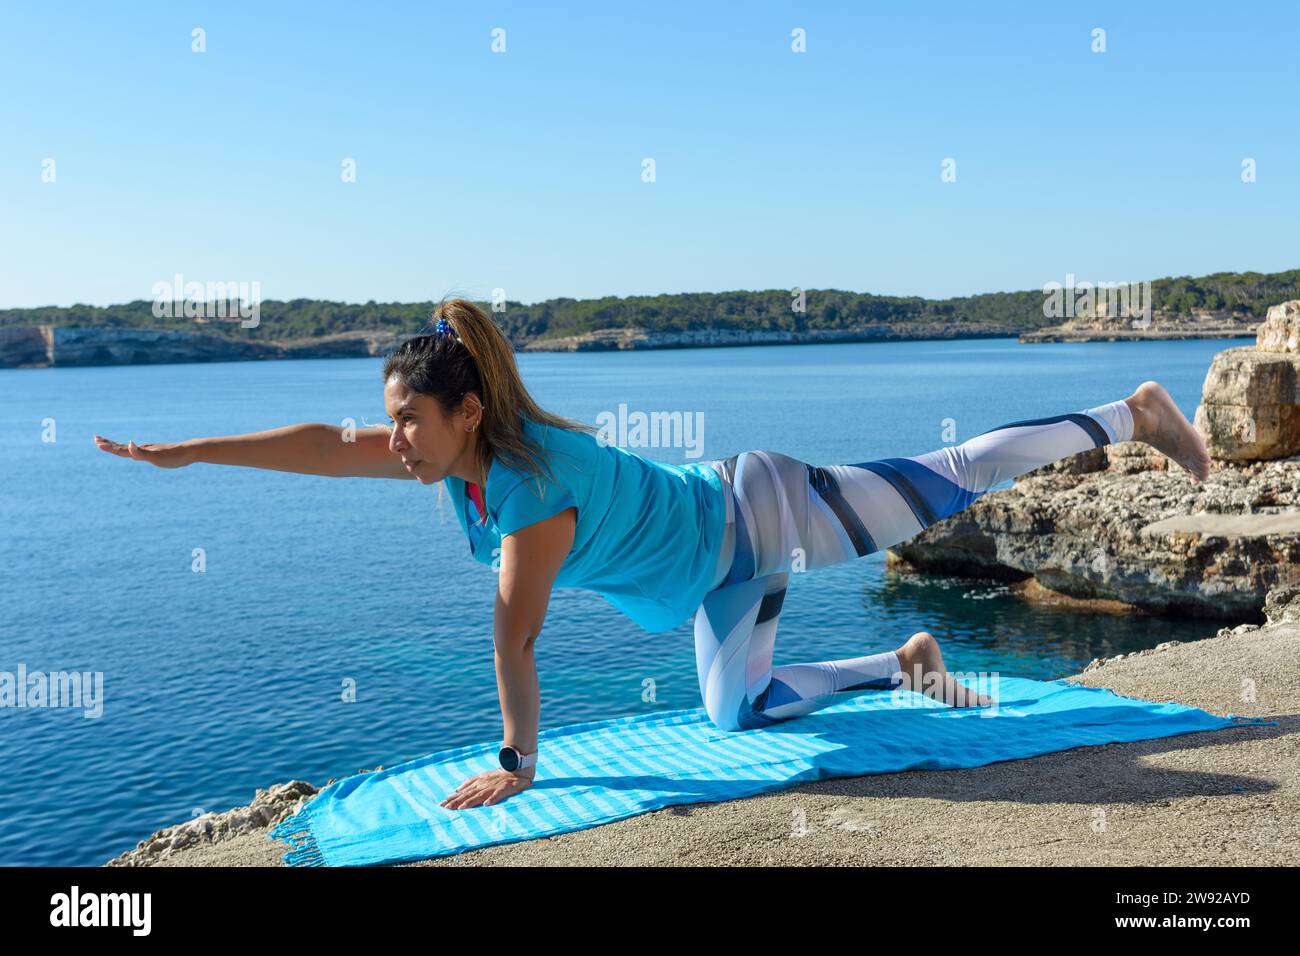 A woman performing a yoga balance pose on a mat by the sea on a sunny day, with cliffs under a blue sky Stock Photo